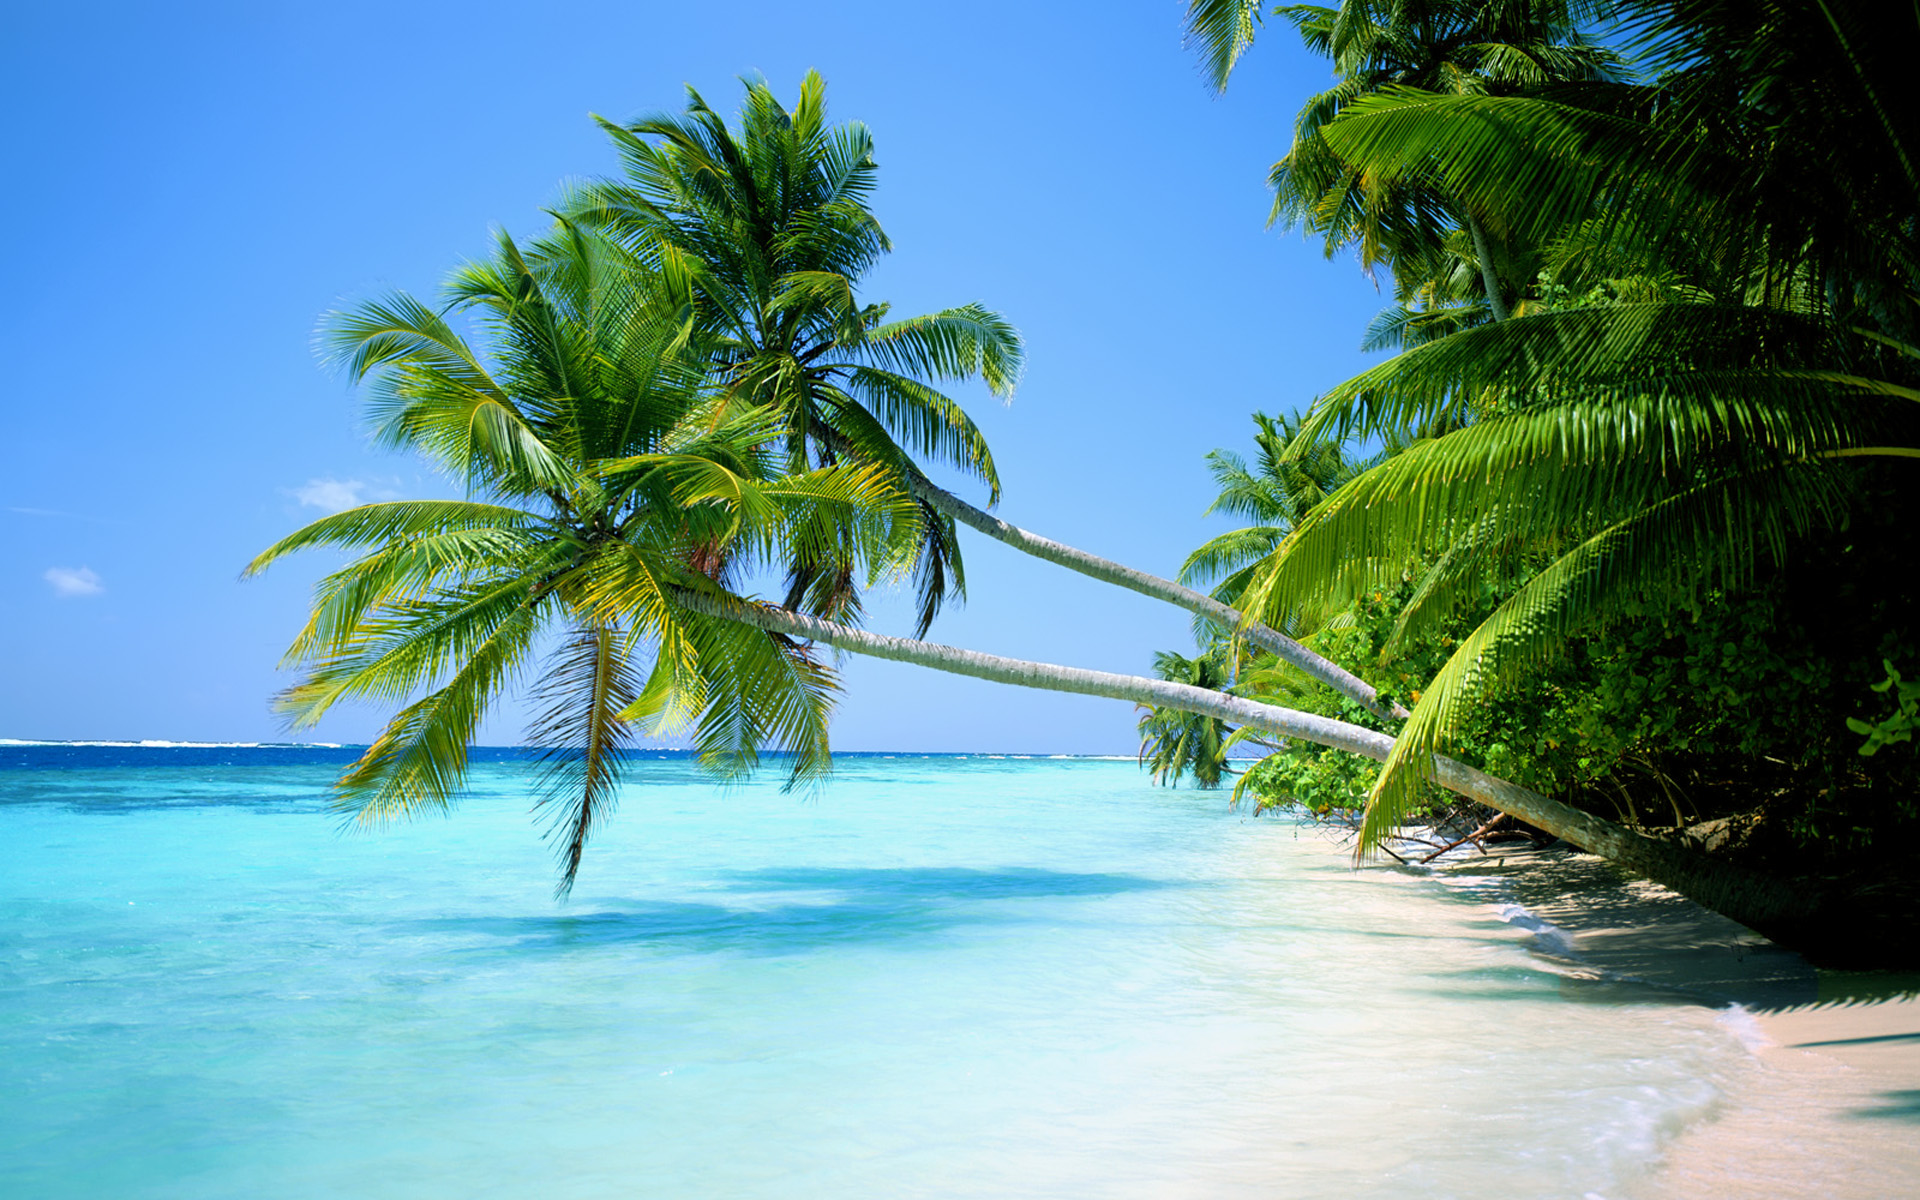 Tropical Beaches With Palm Trees HD Wallpaper, Background Images